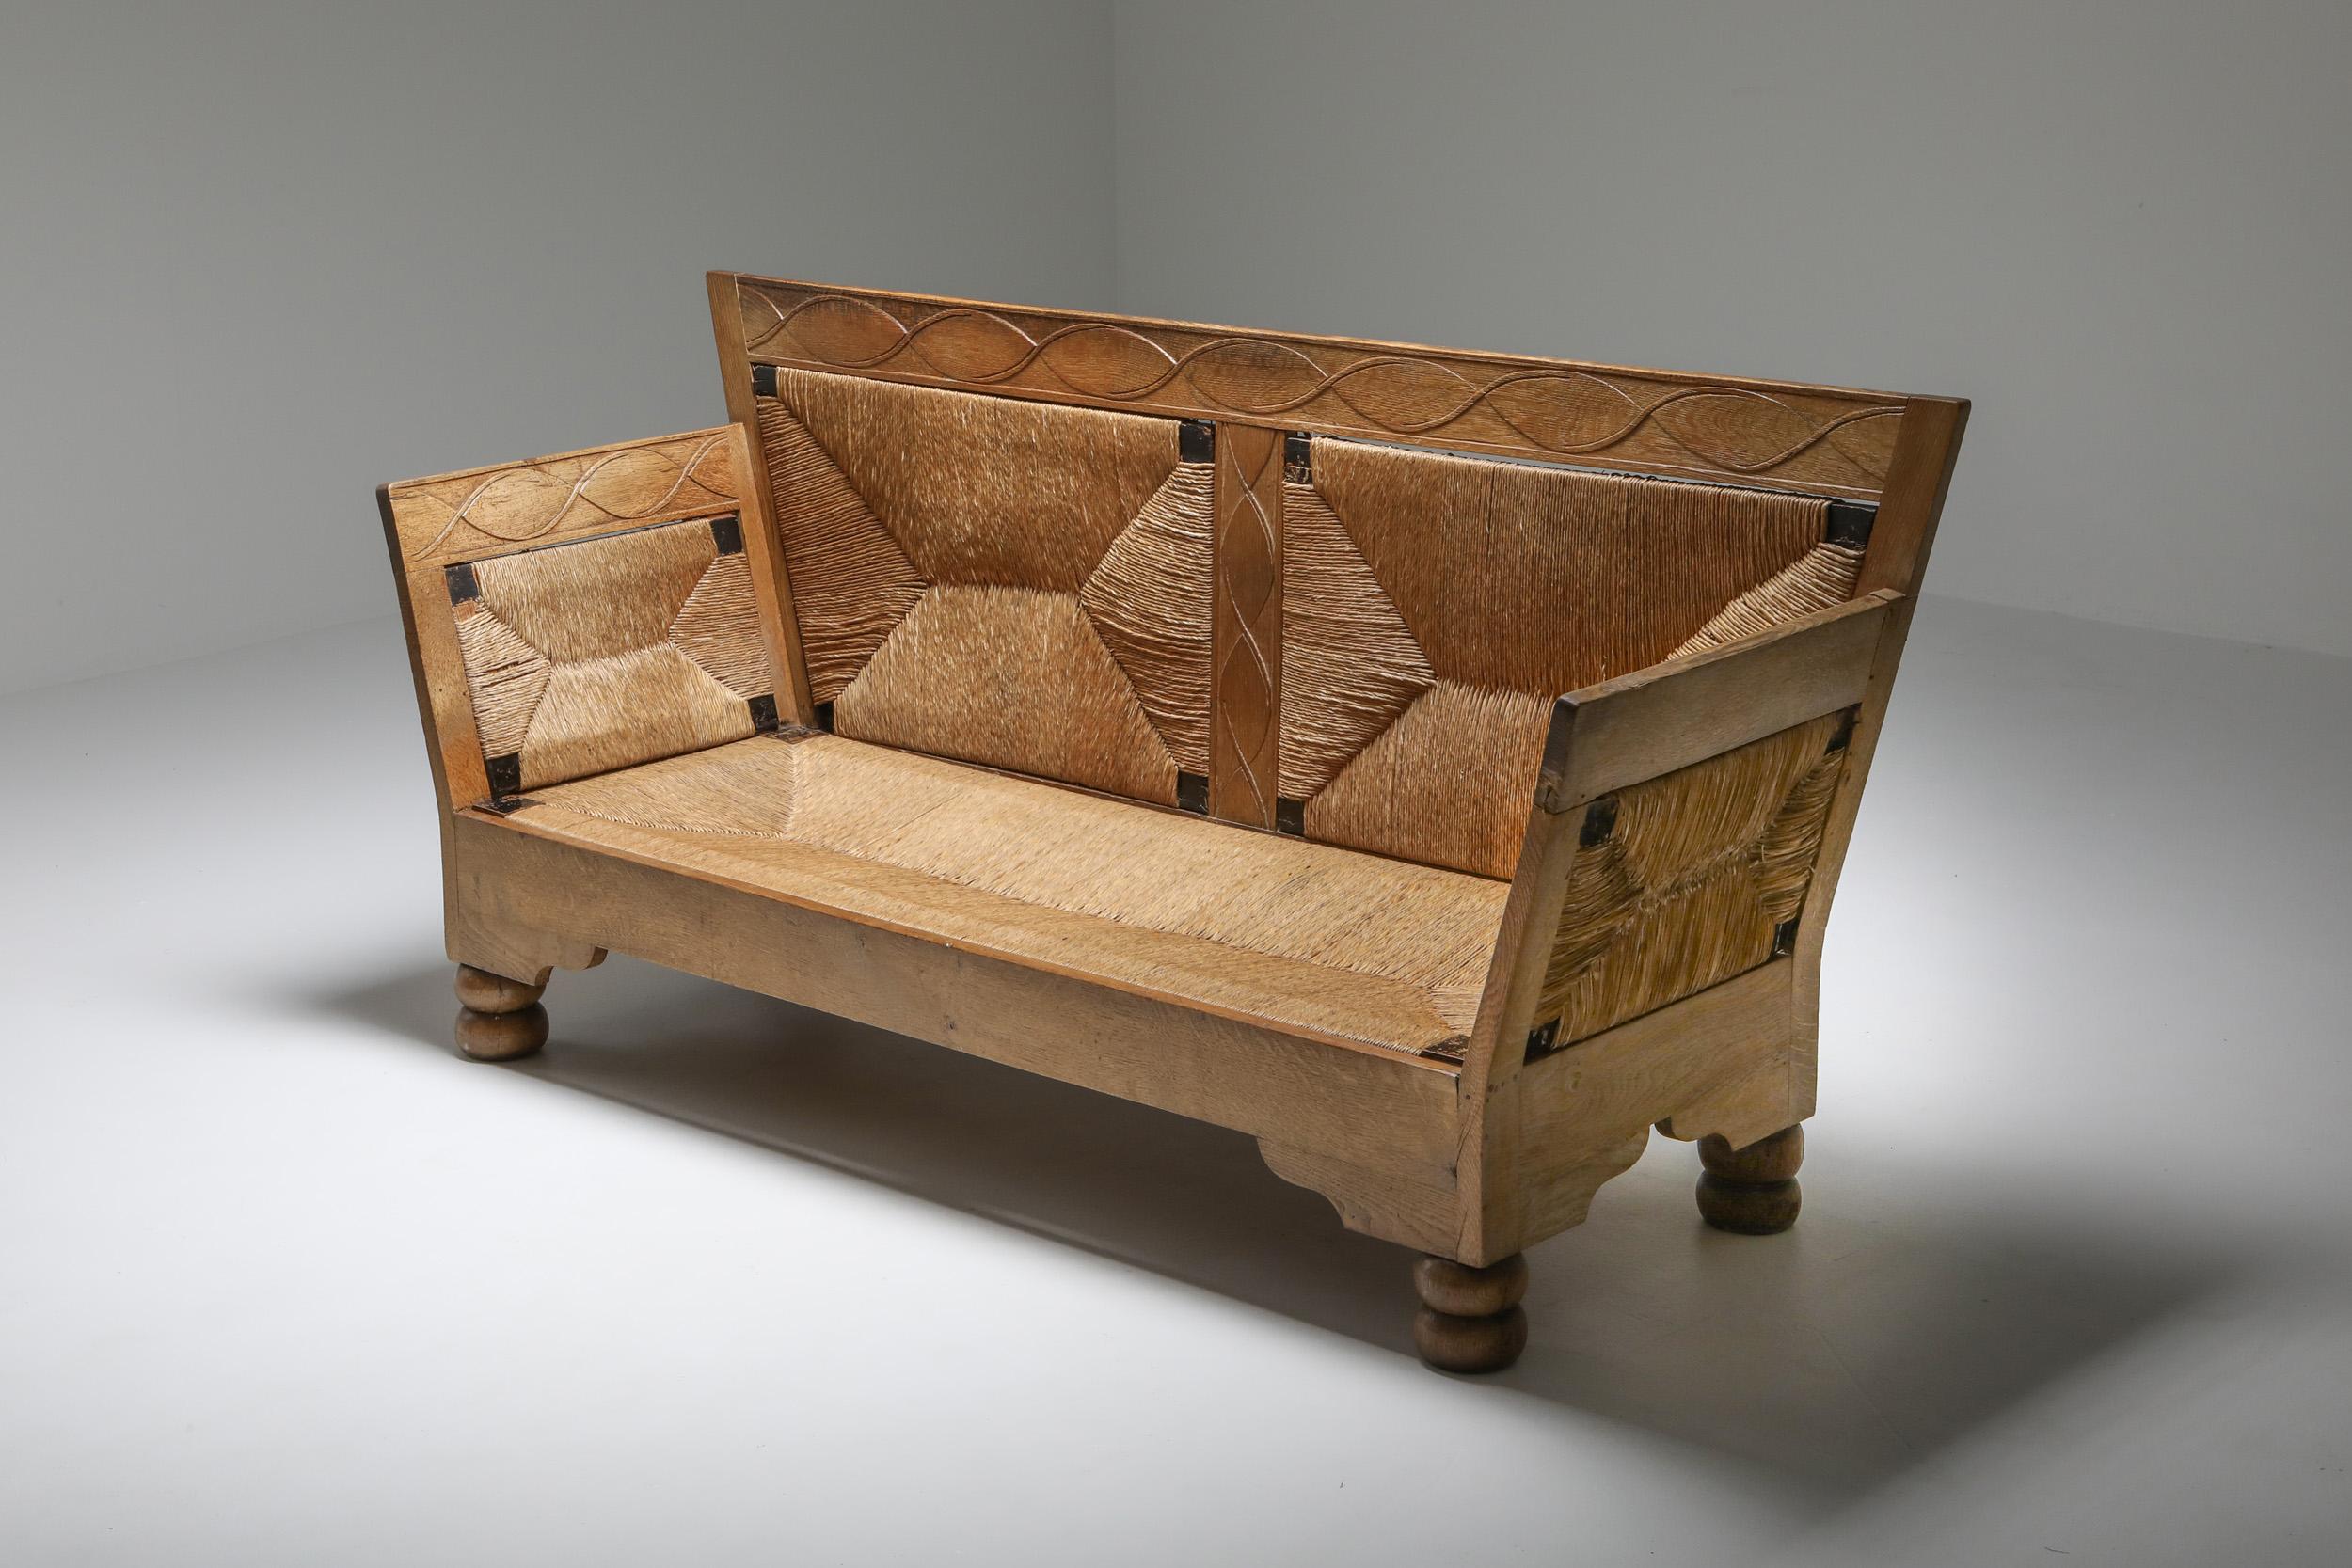 Arts and Crafts Scandinavian Arts & Crafts Sofa Bench in Oak and Straw